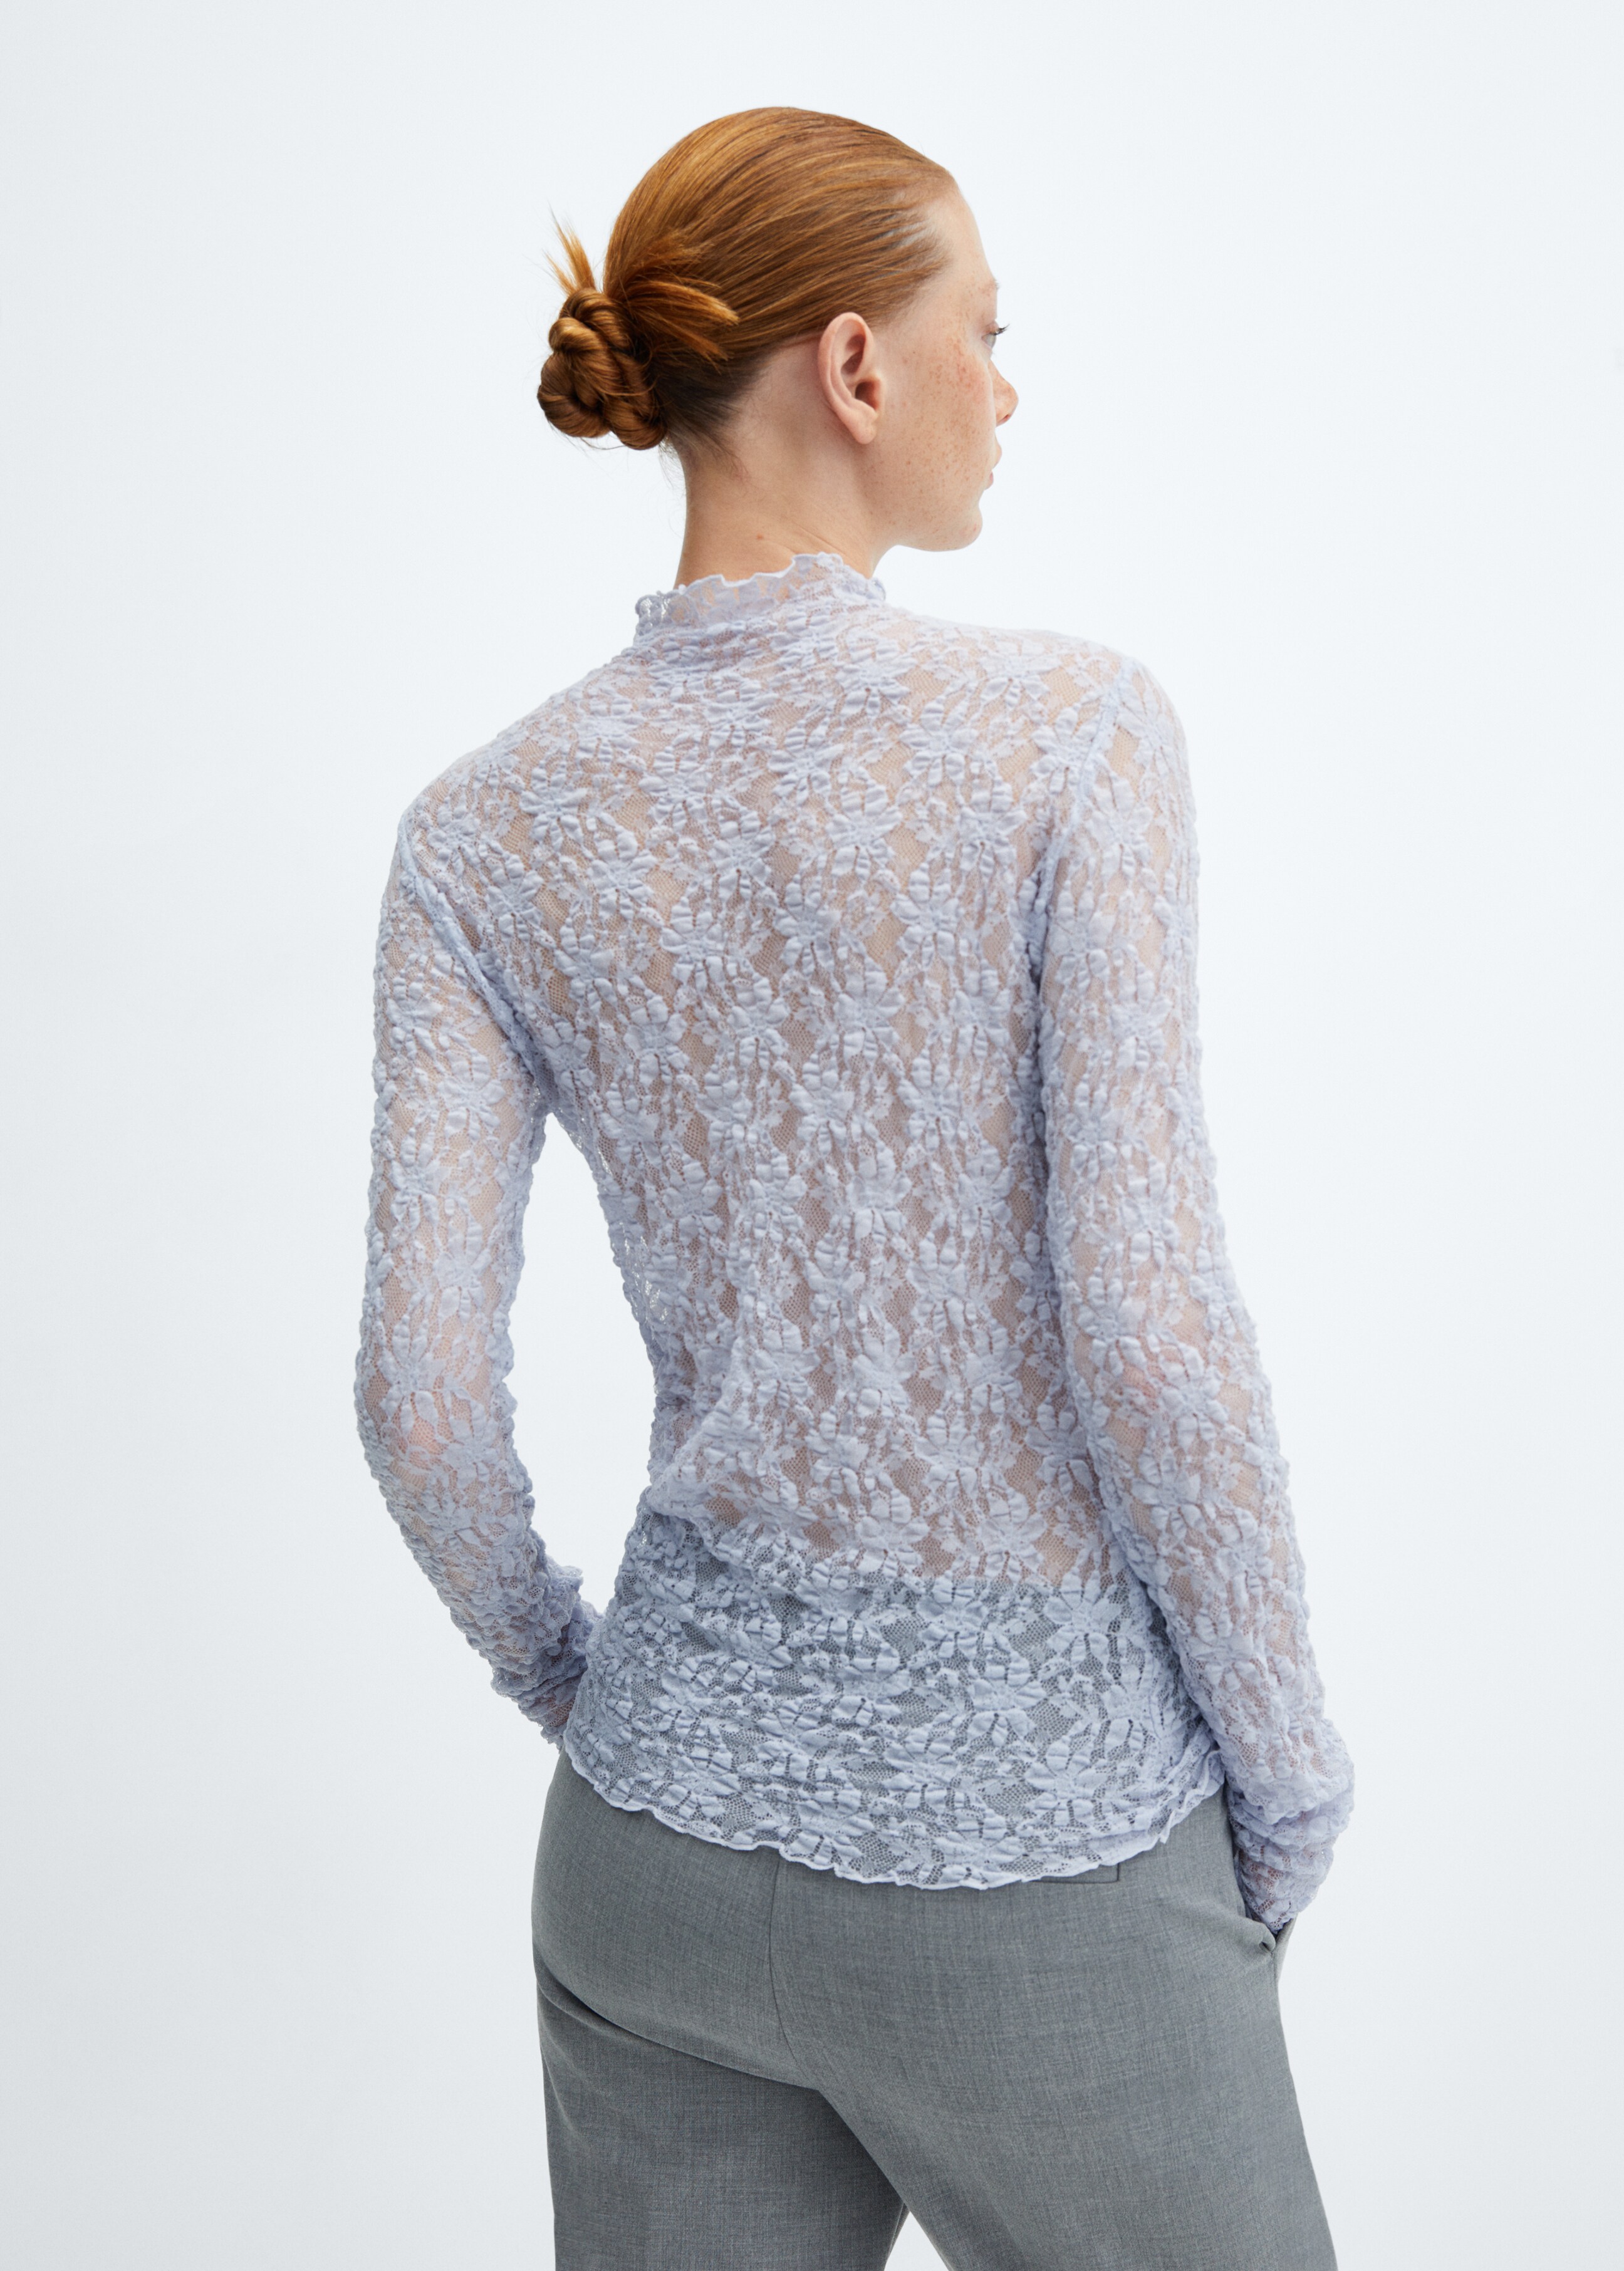 Lace t-shirt with perkins collar  - Reverse of the article